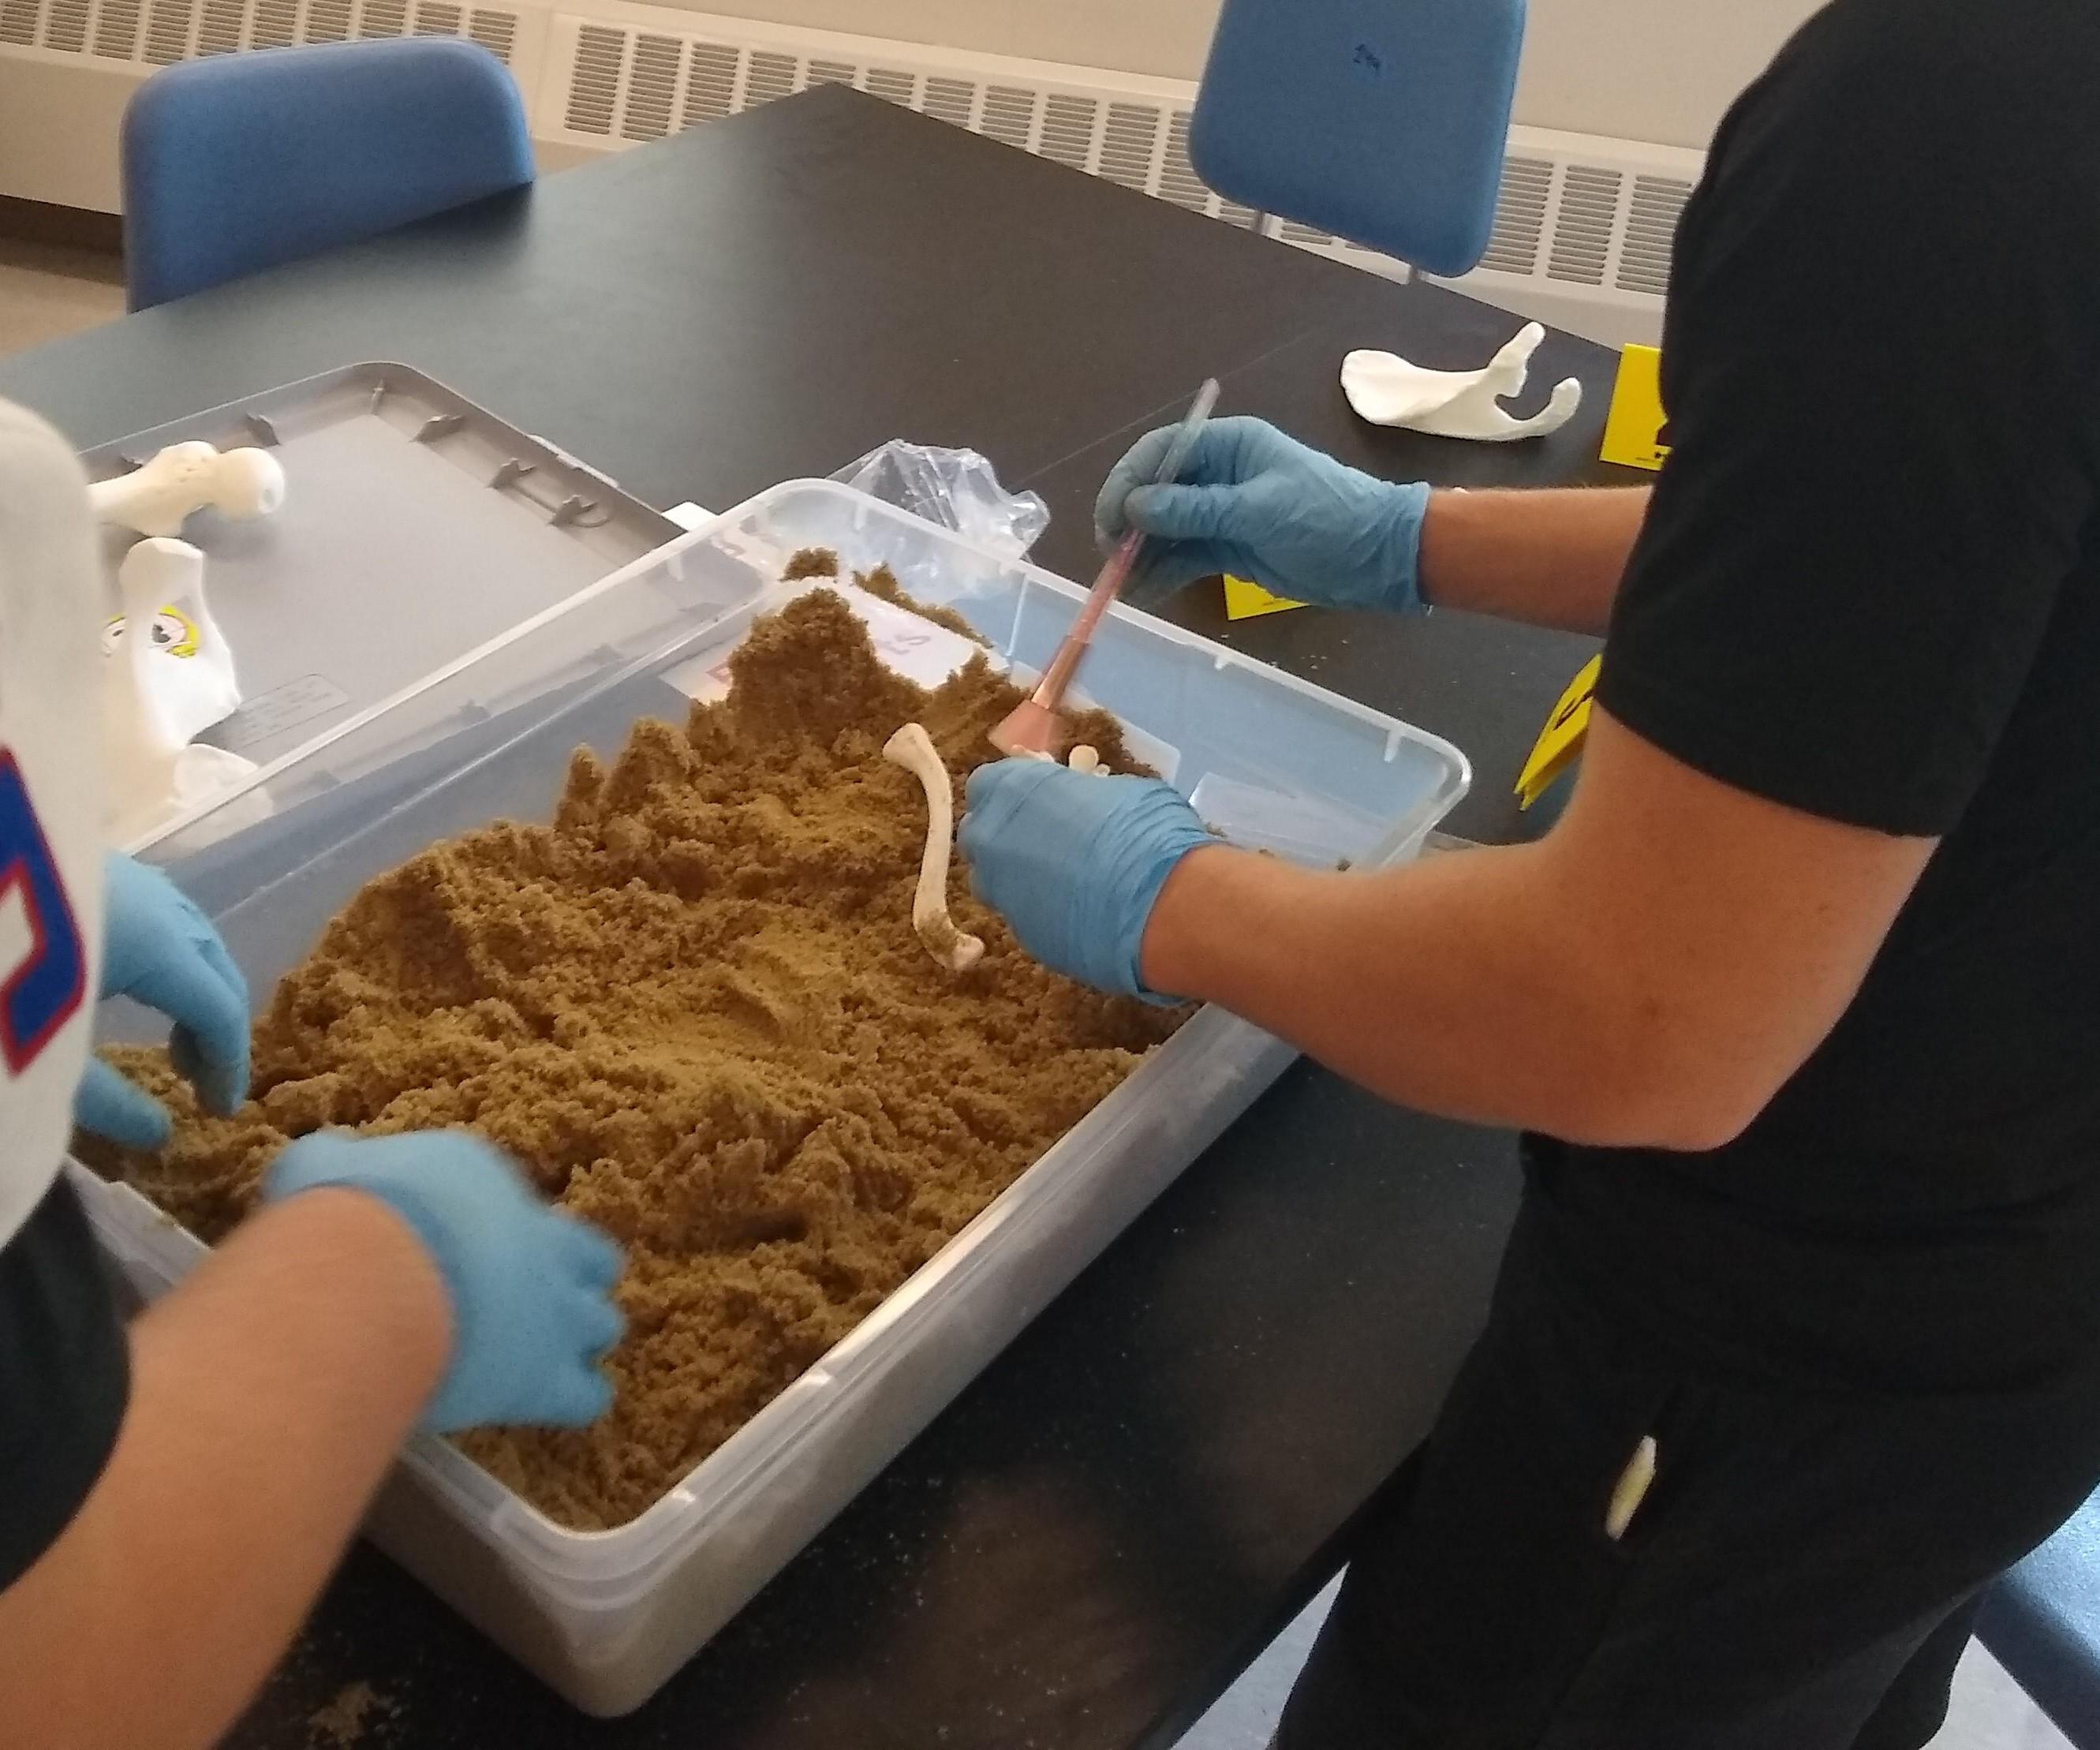 Forensic Anthropology With 3D Printed Bones